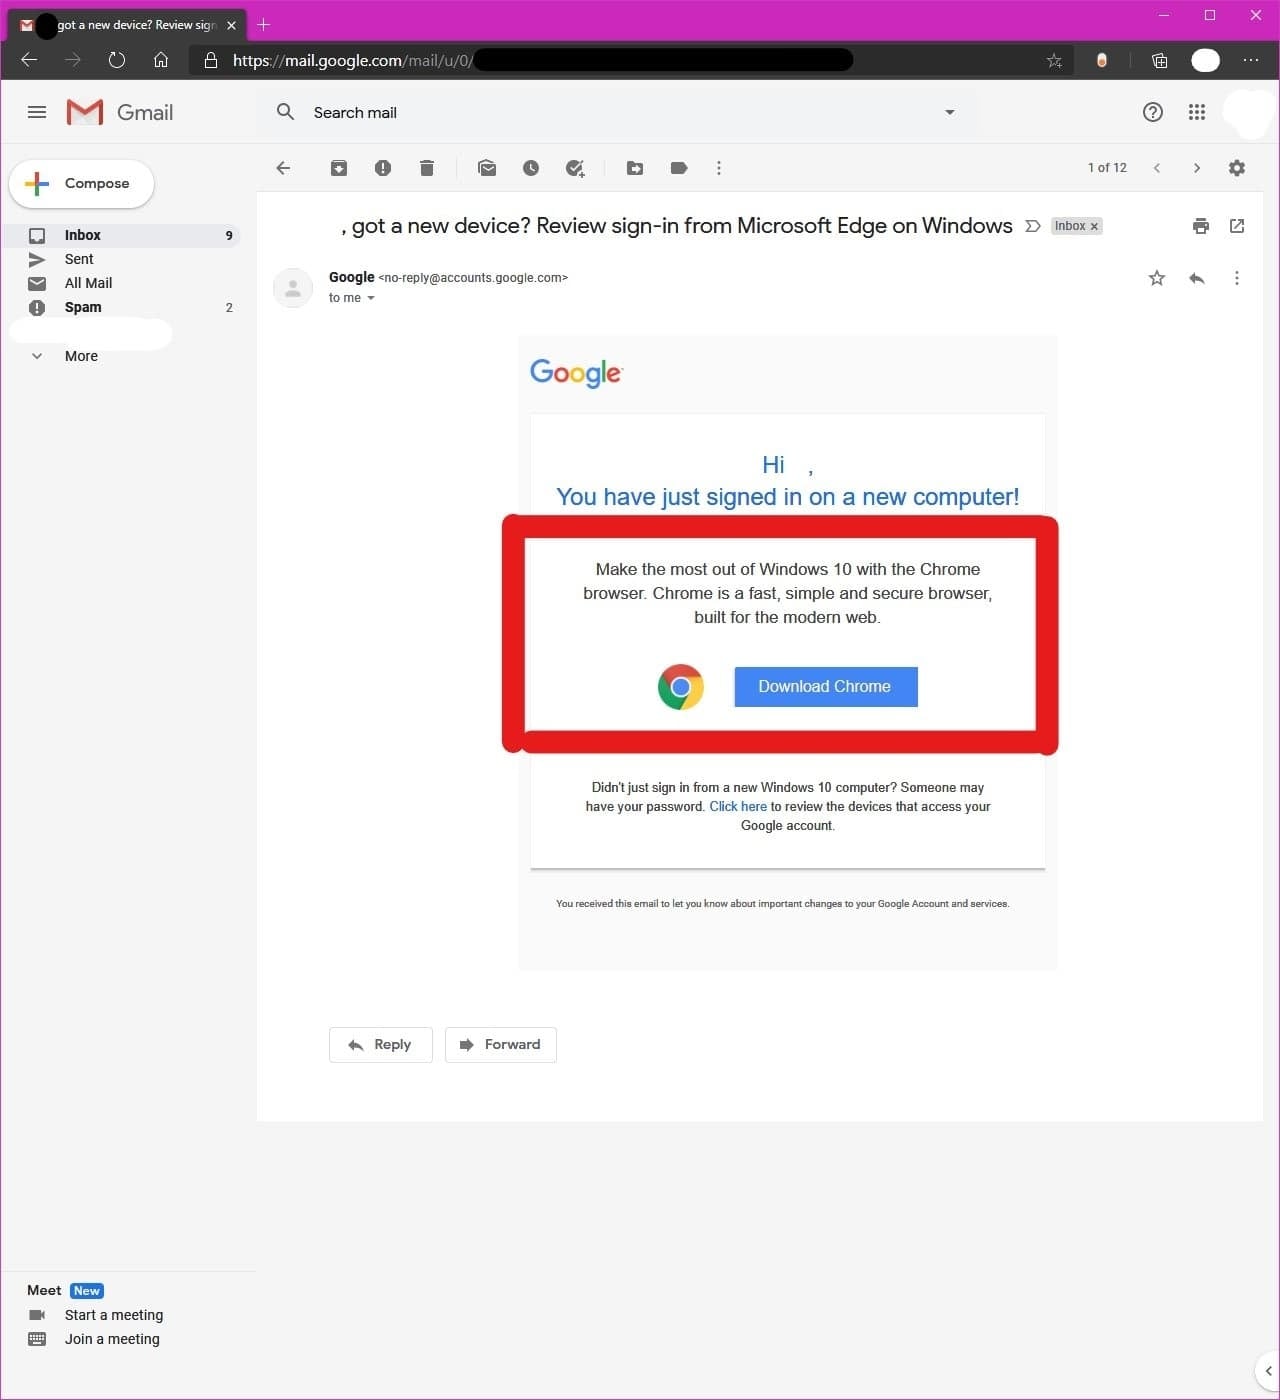 security email backup gmail